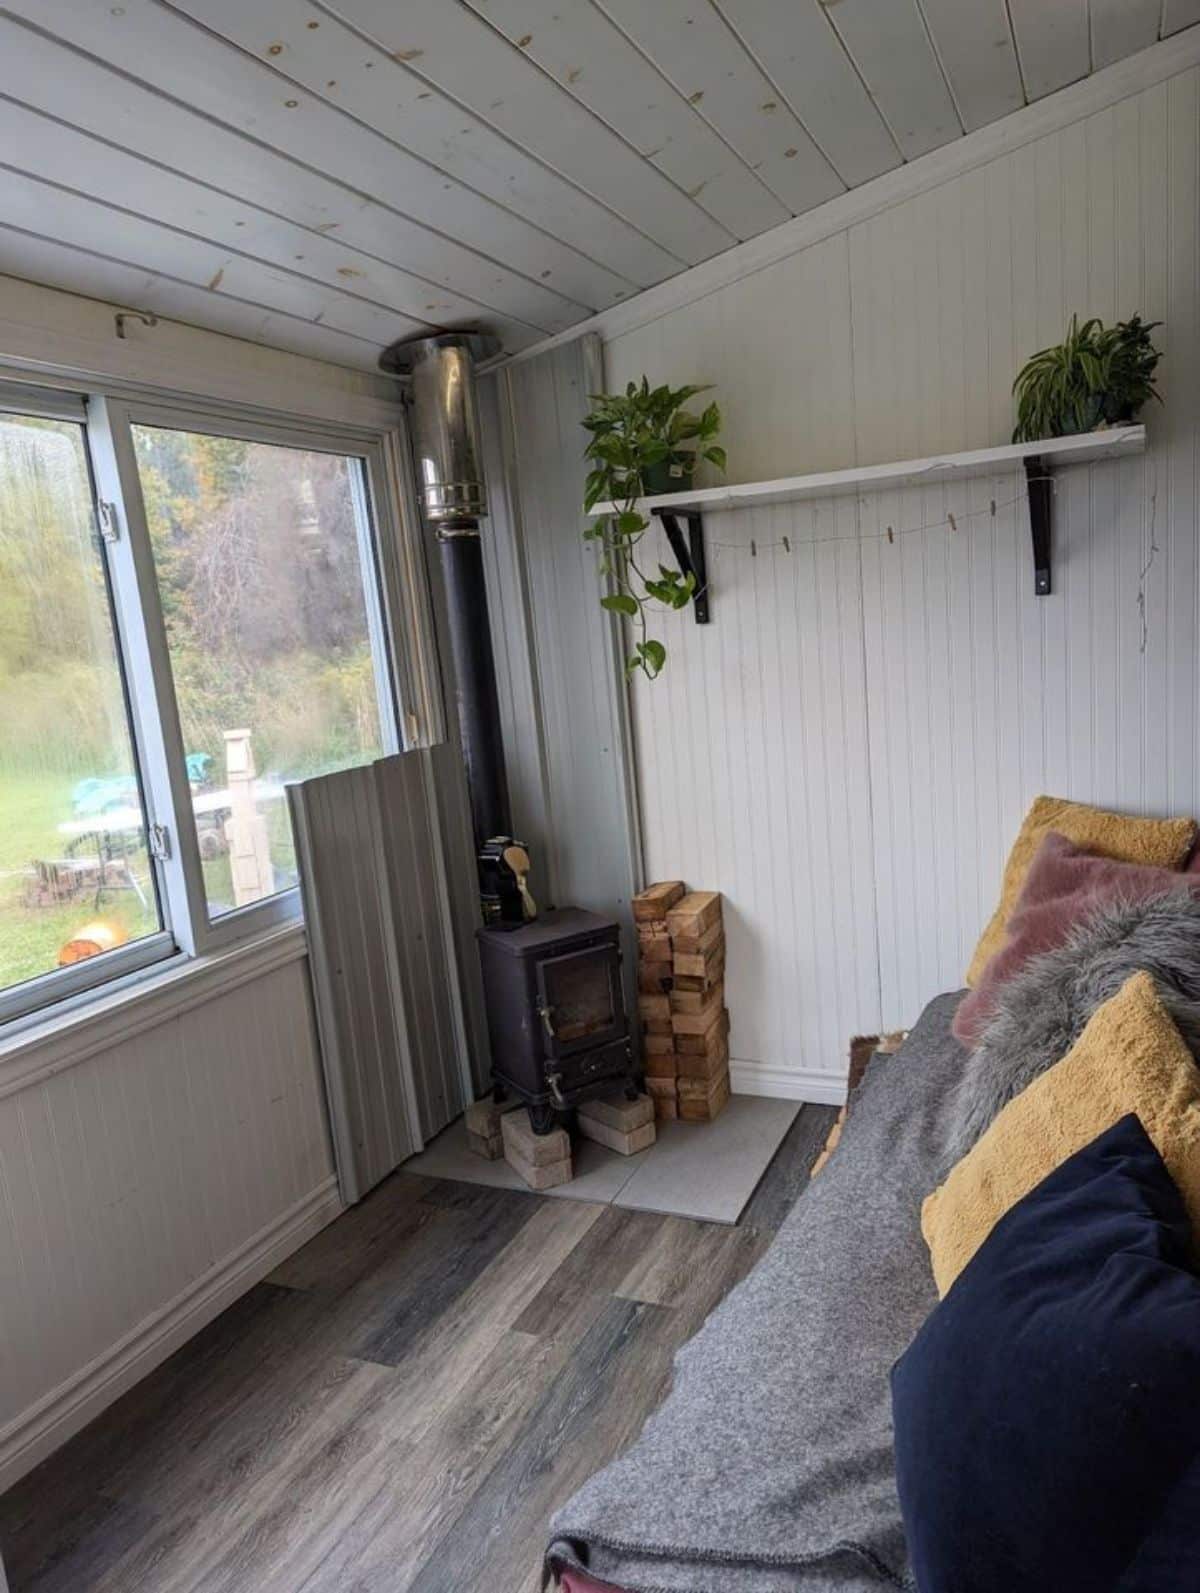 additional space makes the perfect space for lounge experience to chill at off grid tiny home